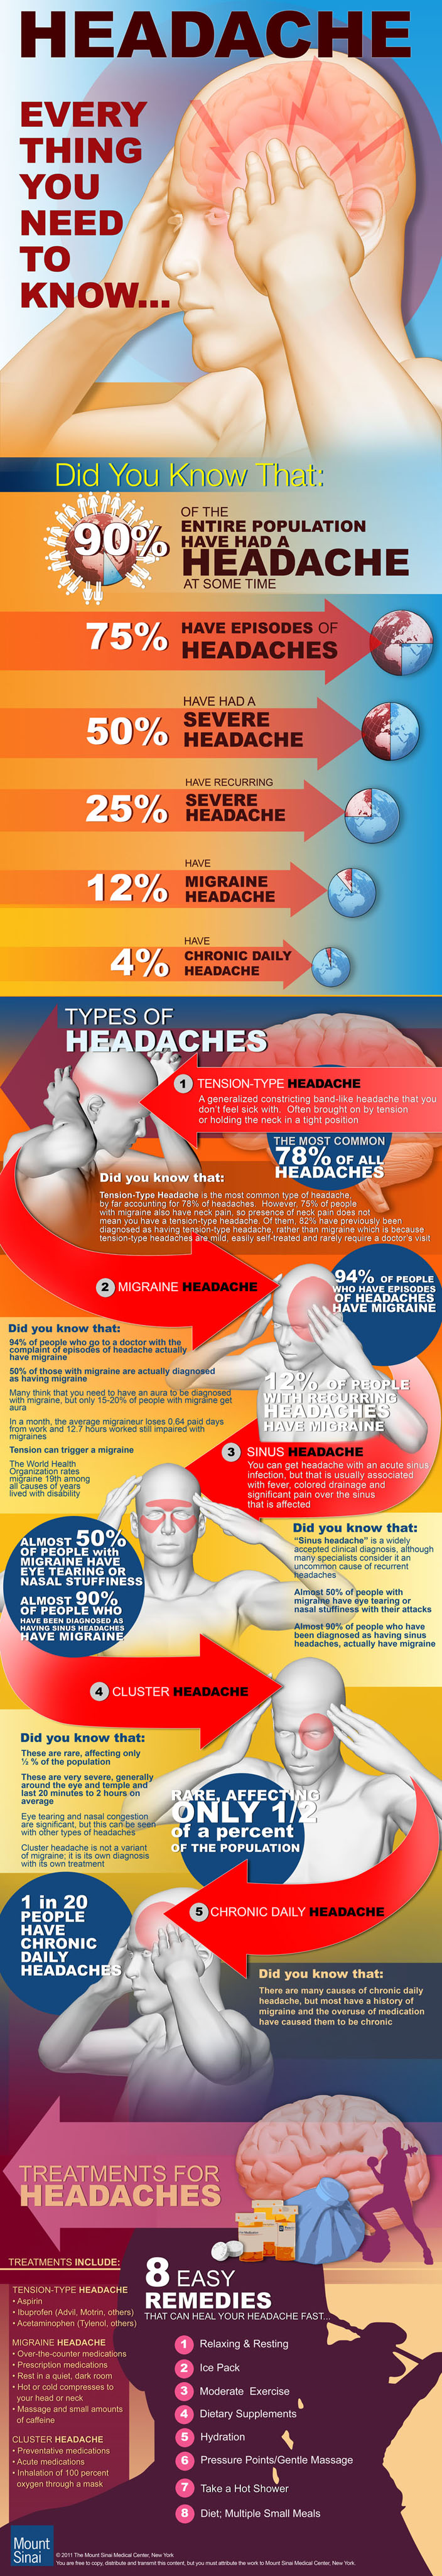 Everything you need to know about headache